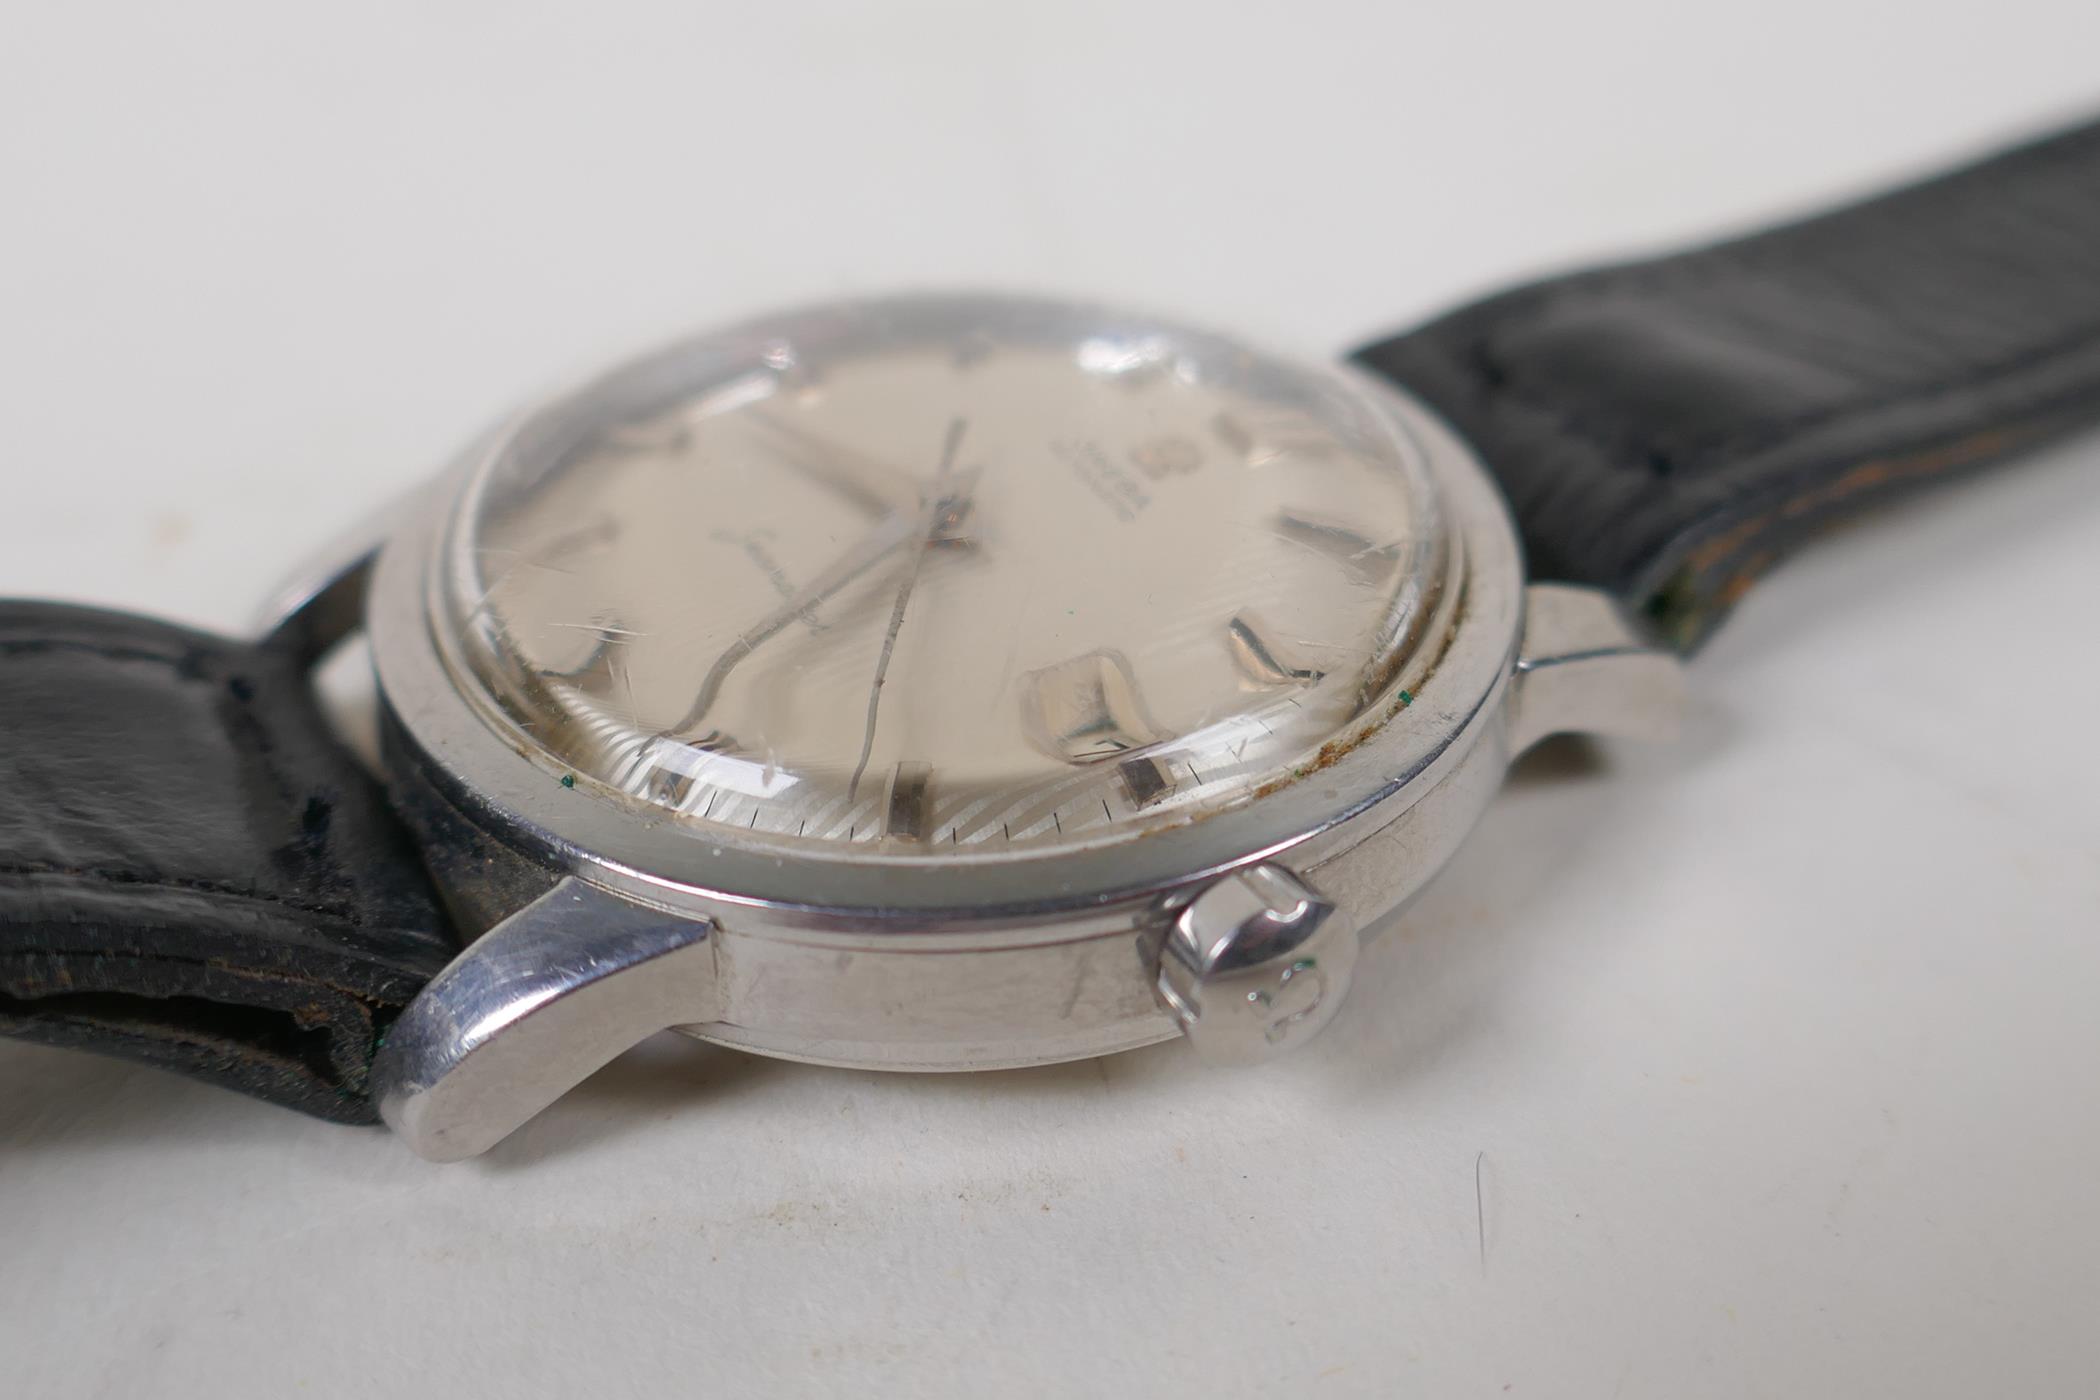 An Omega Seamaster wrist watch with date aperture, a/f - Image 4 of 6